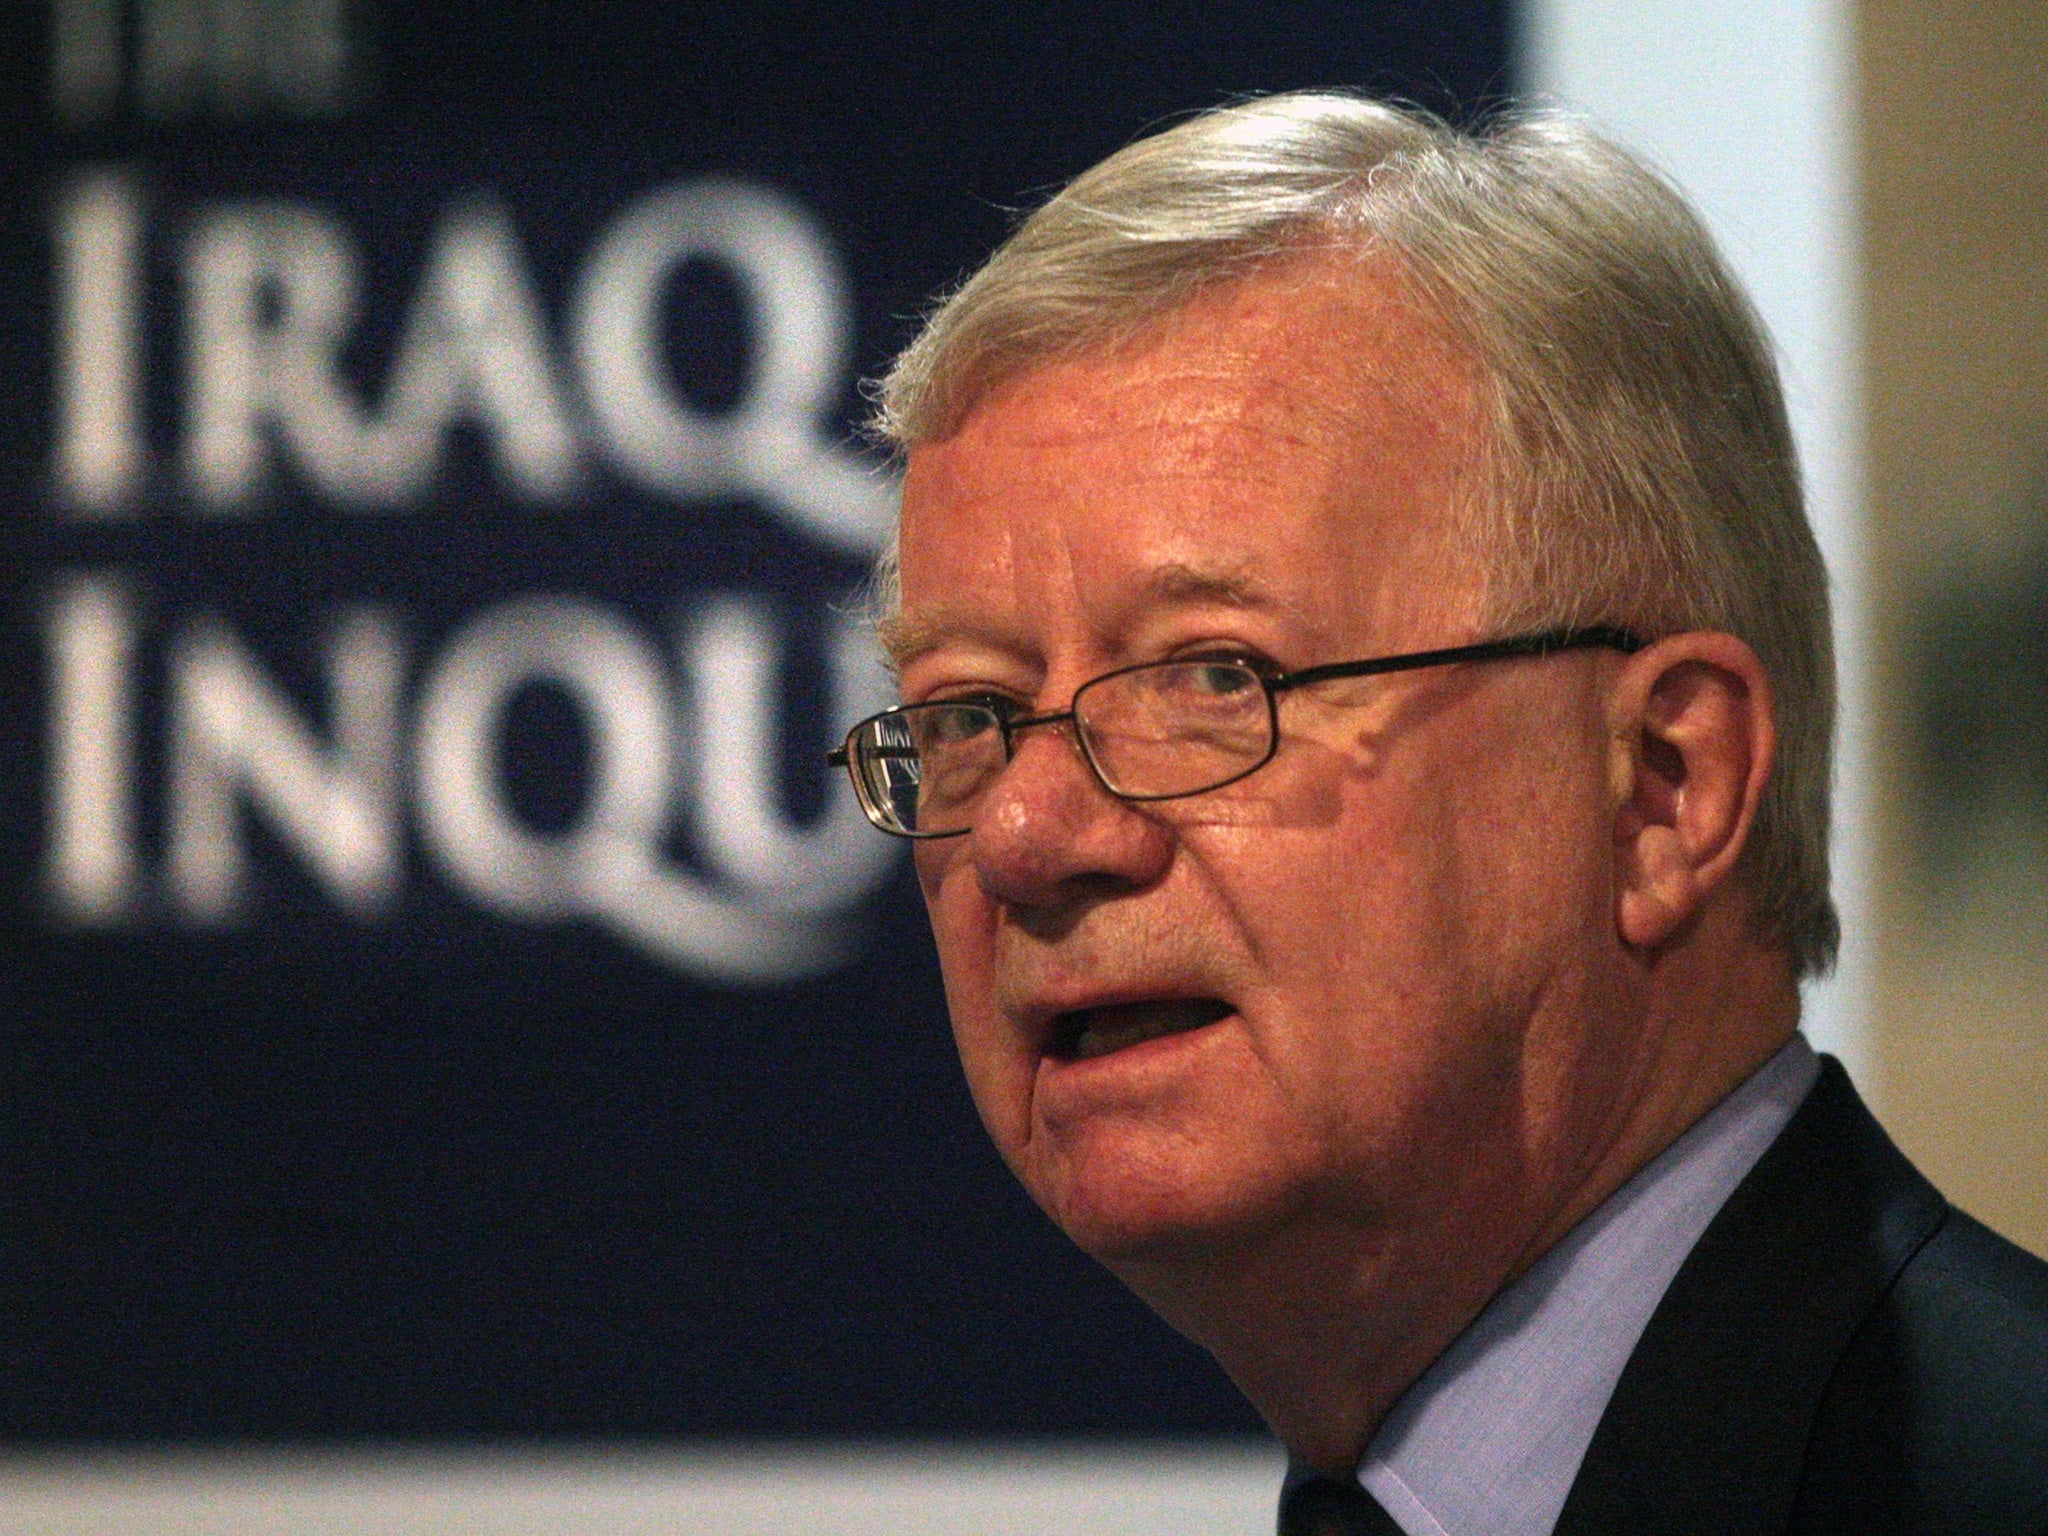 Sir John Chilcot has said that the Iraq Inquiry report should be ready for publication in June or July 2016